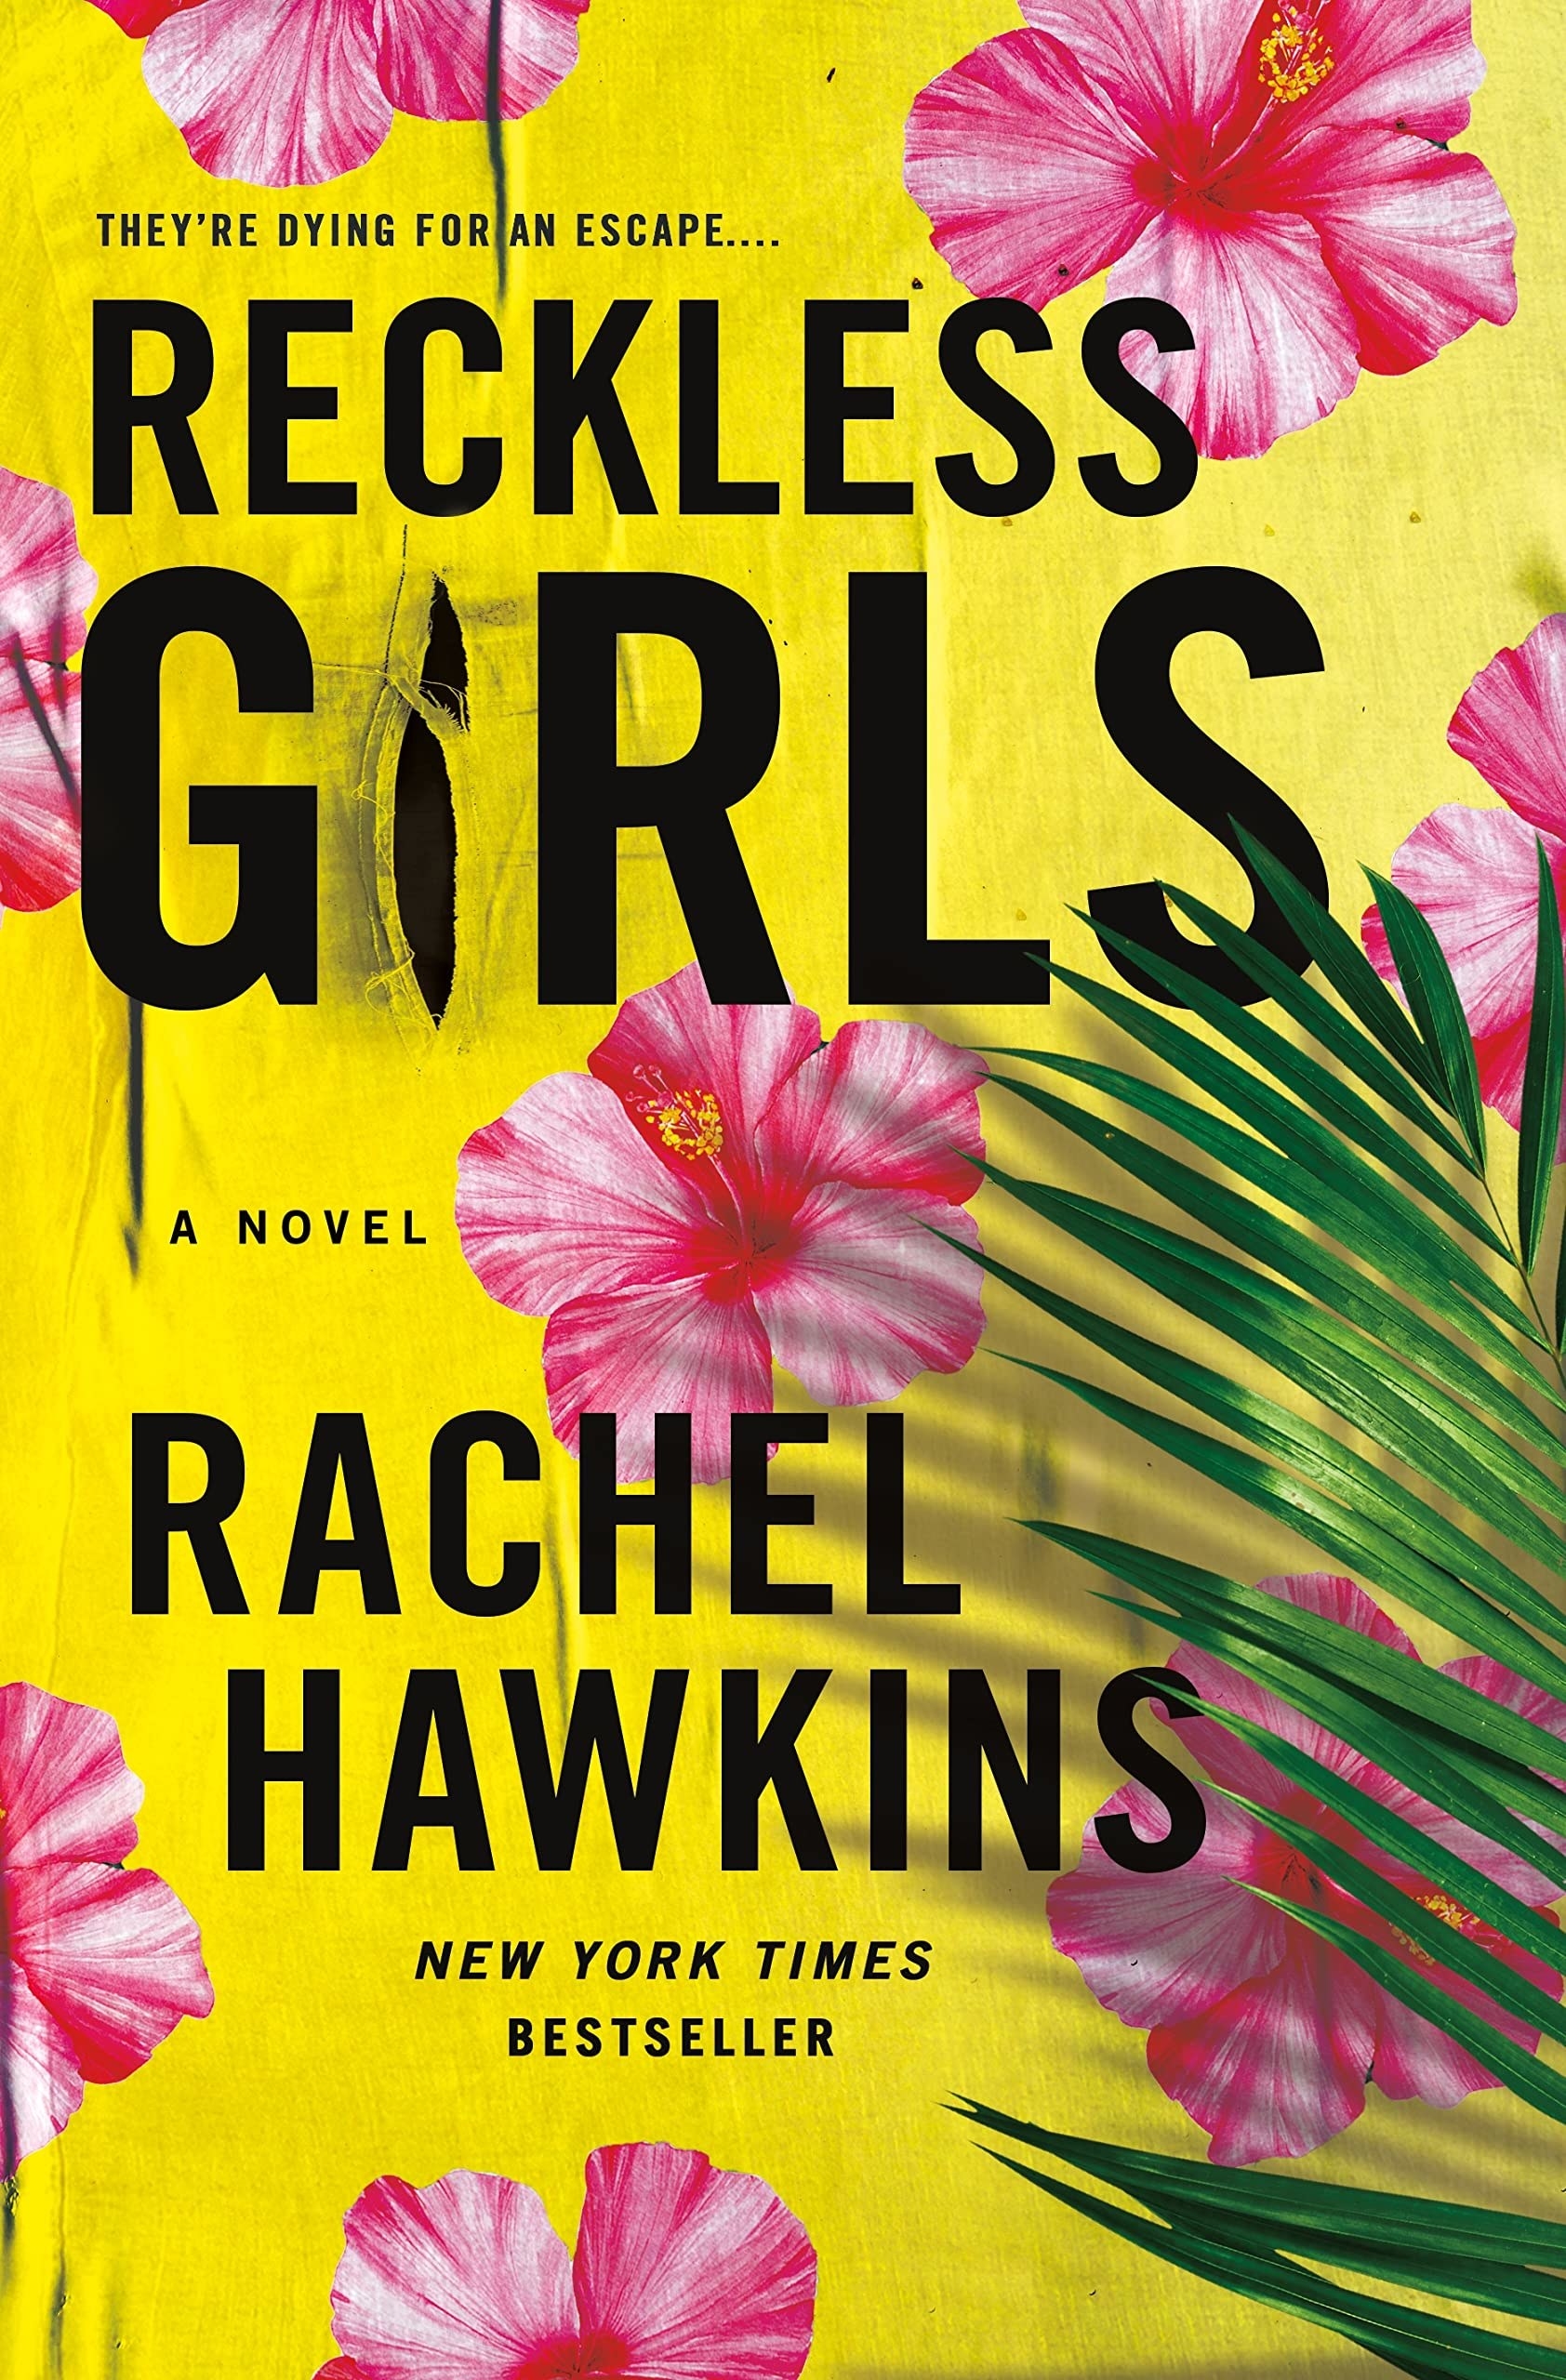 The cover of &quot;Reckless Girls&quot; by Rachel Hawkins.